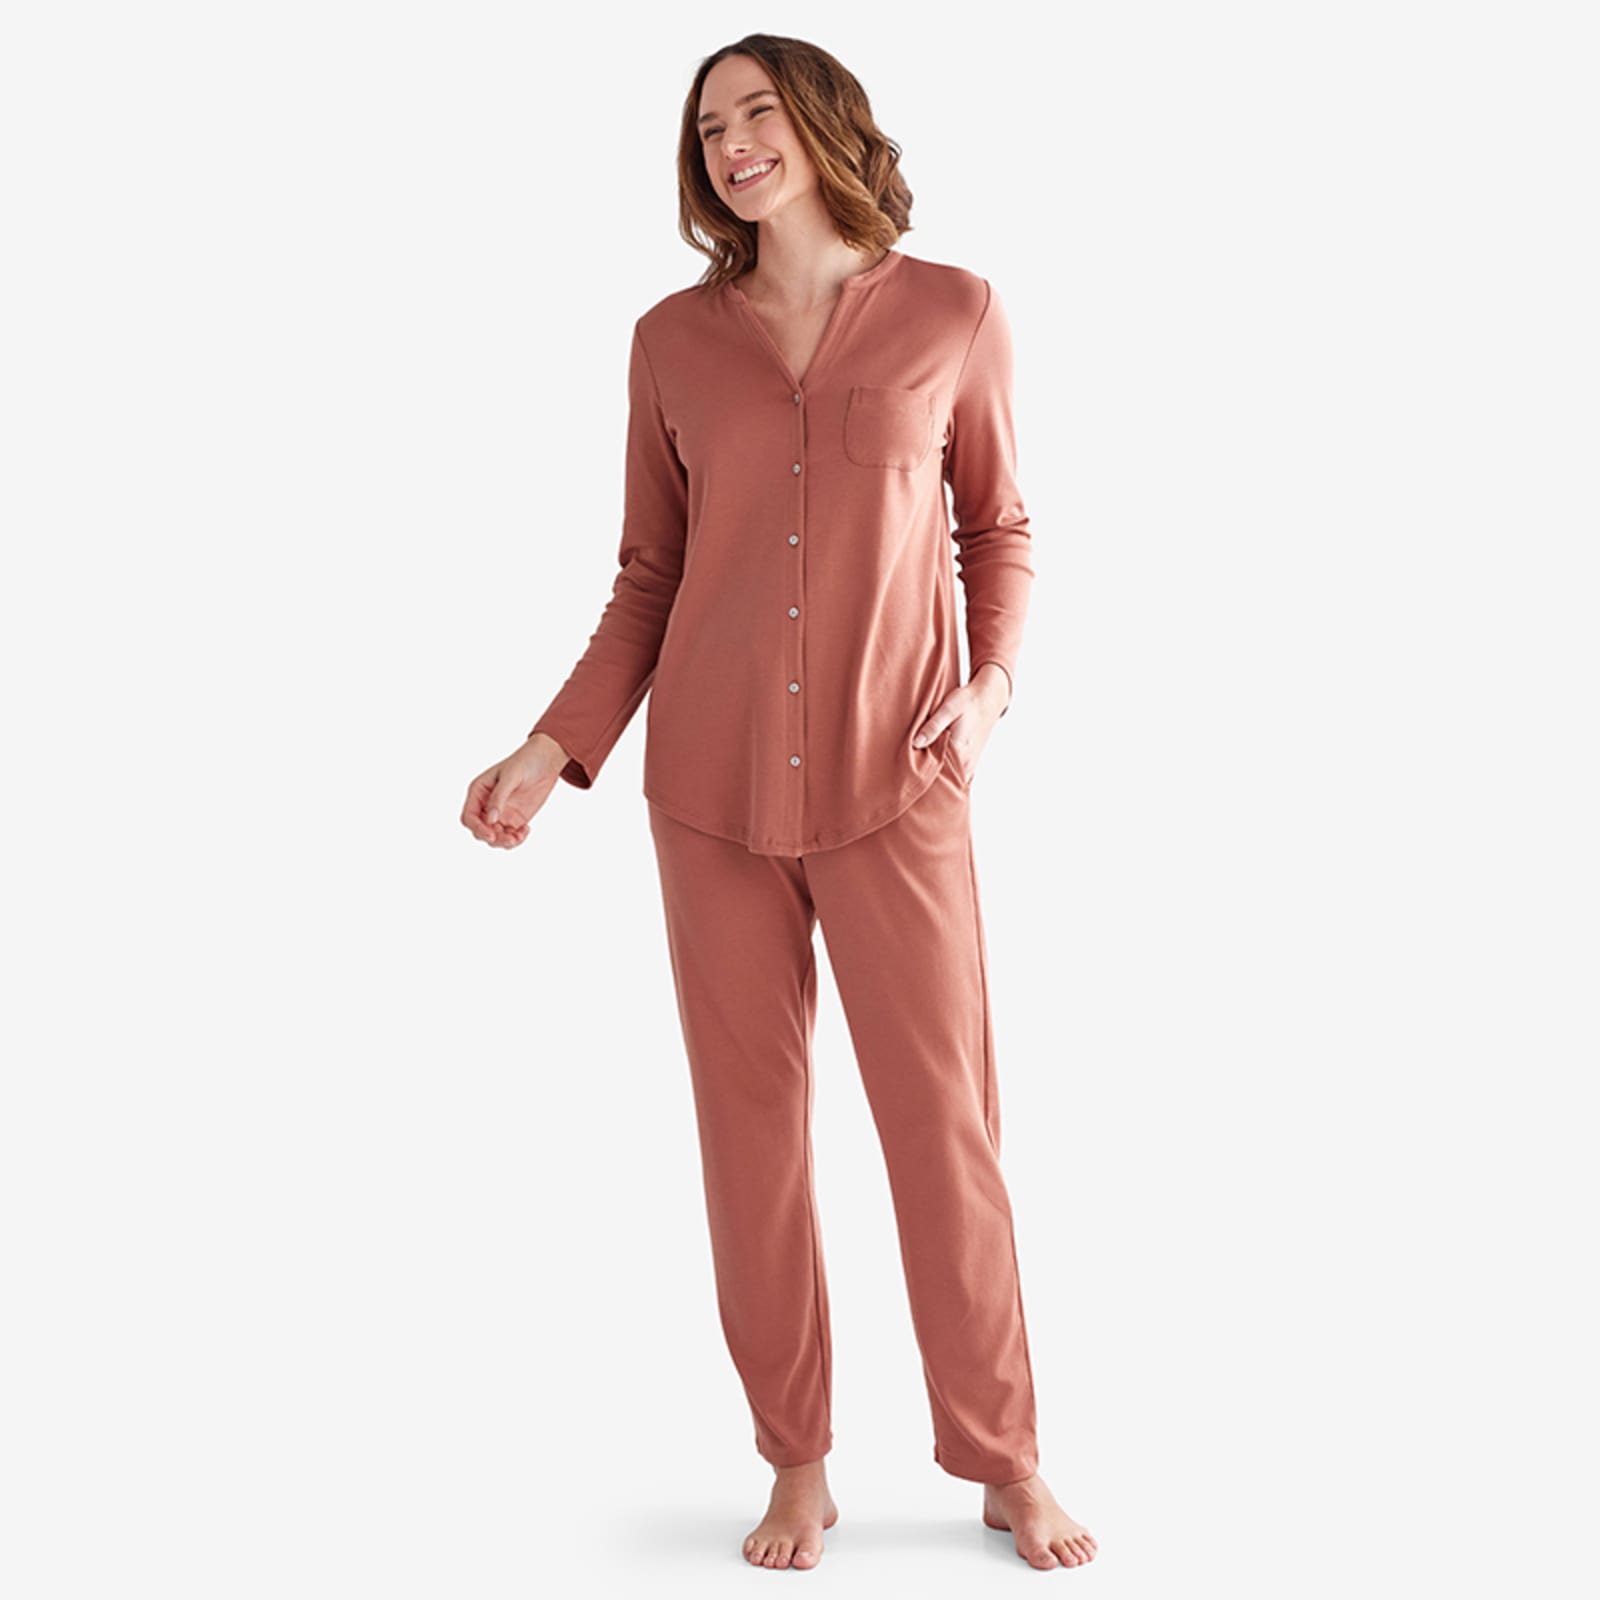 Sova Women's 2-Pack Ultra Comfy Relaxed Fit Micro Fleece Pajama